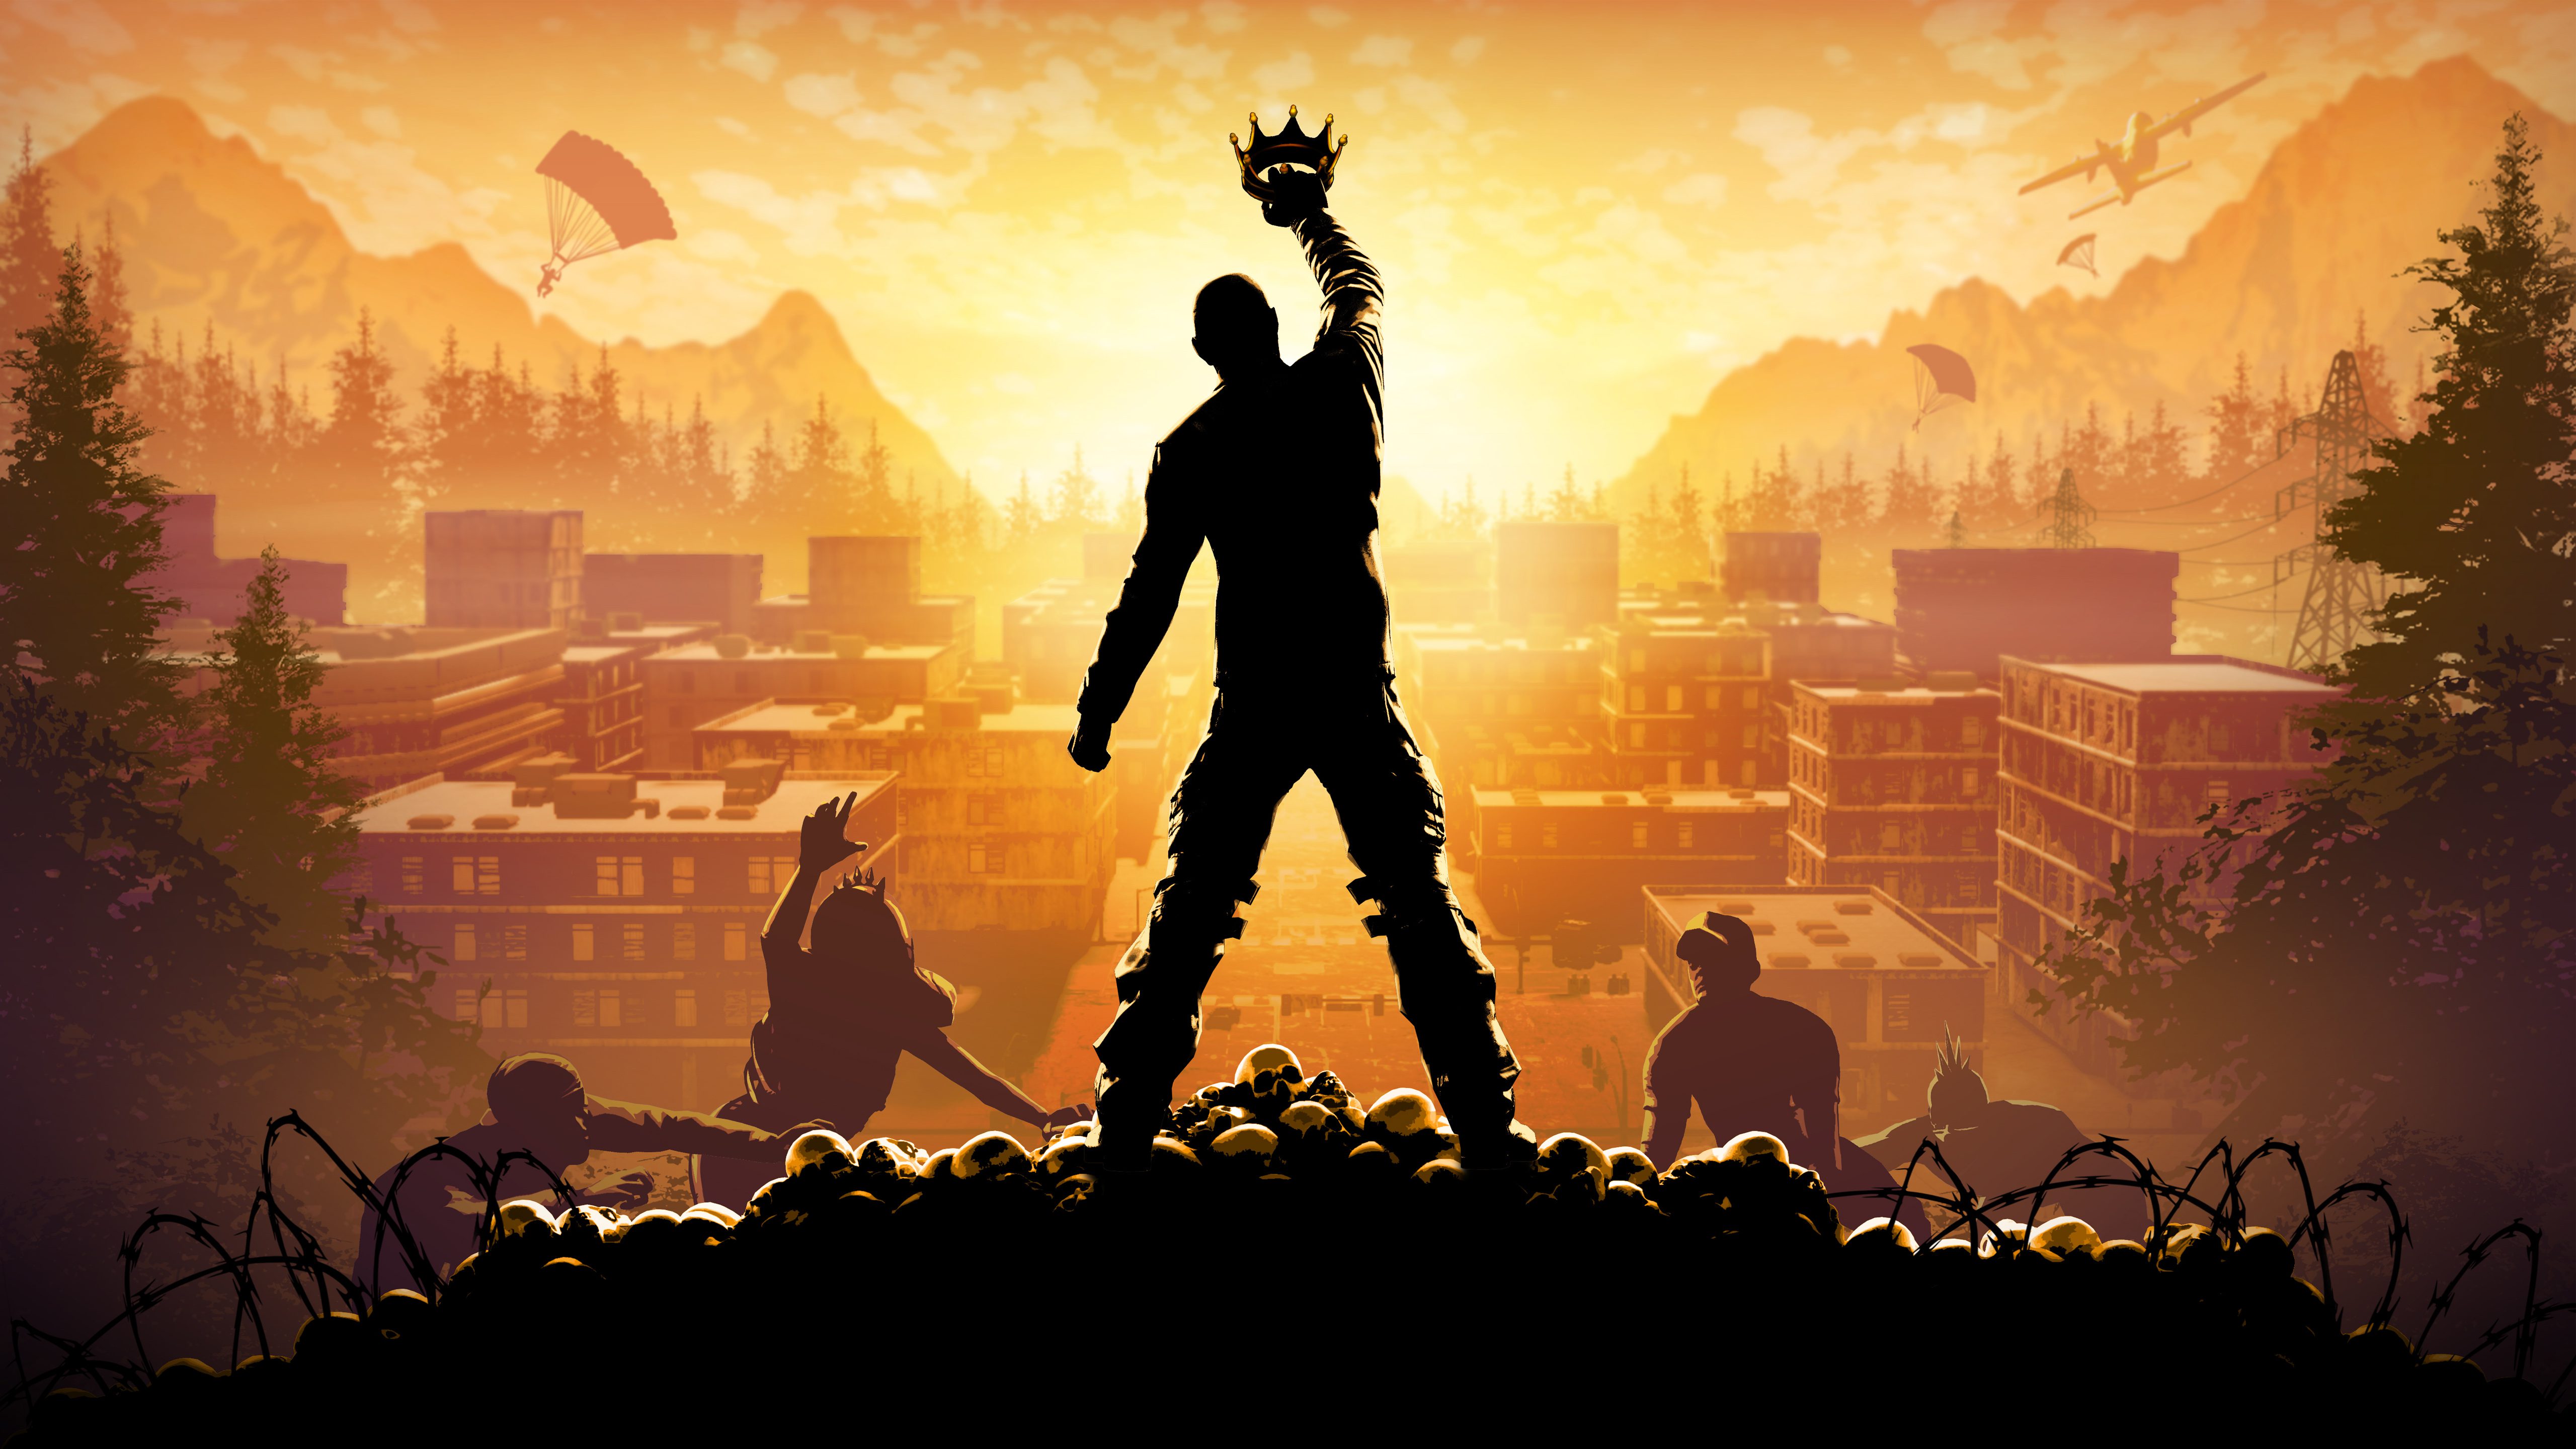 First team-based H1Z1: King of the Kill tournament to debut on The CW Network